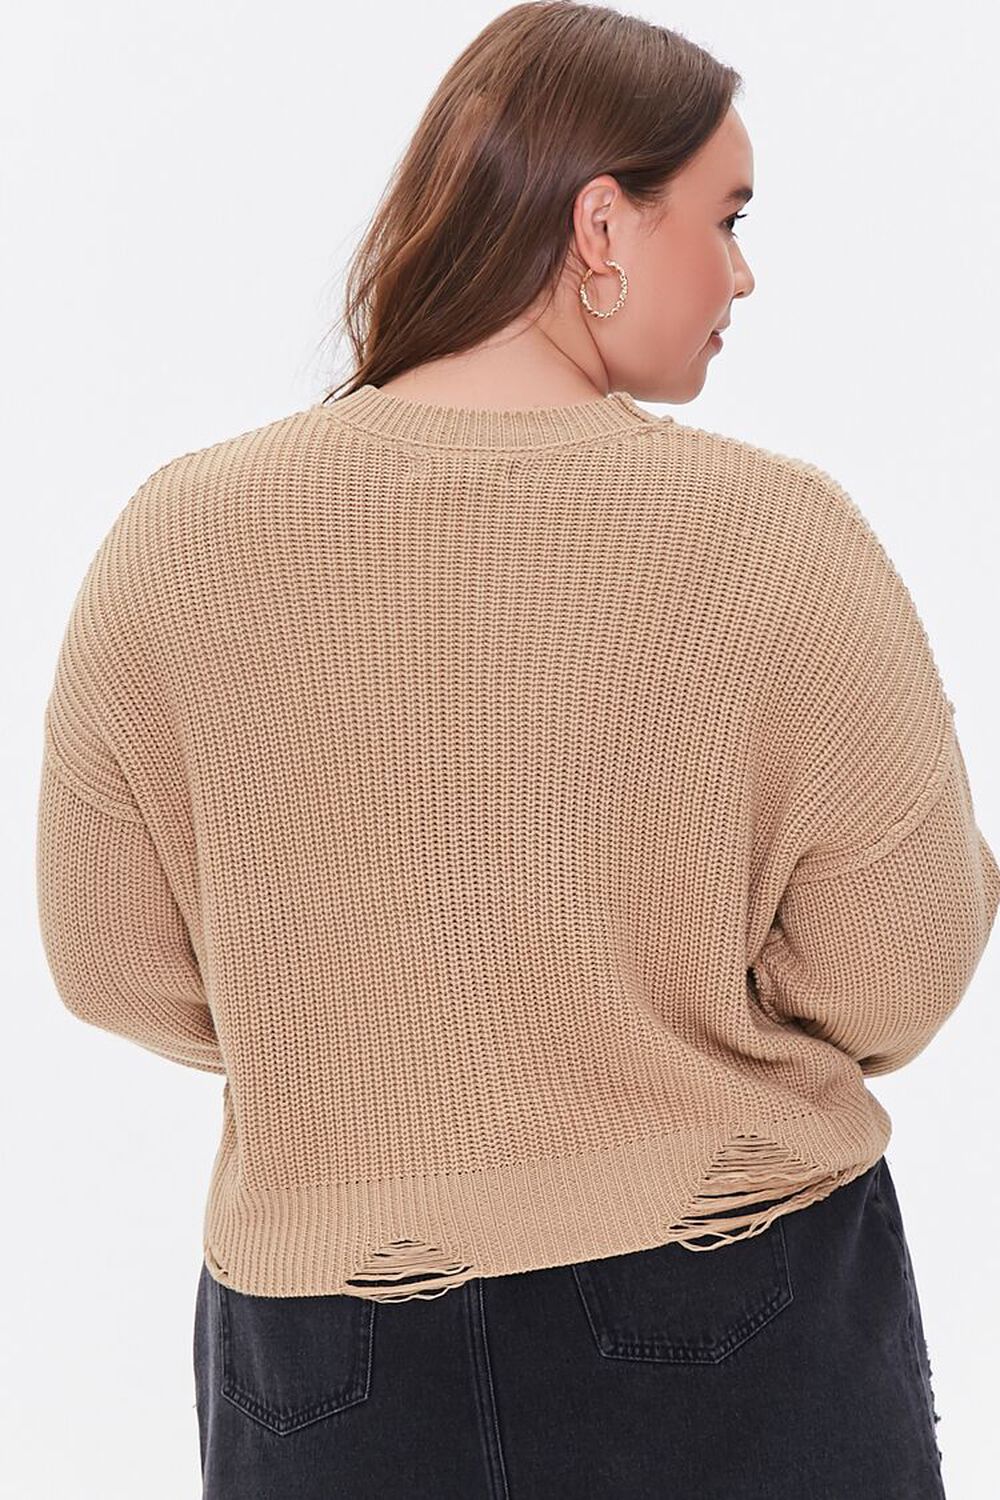 TAUPE Plus Size Distressed Sweater, image 3